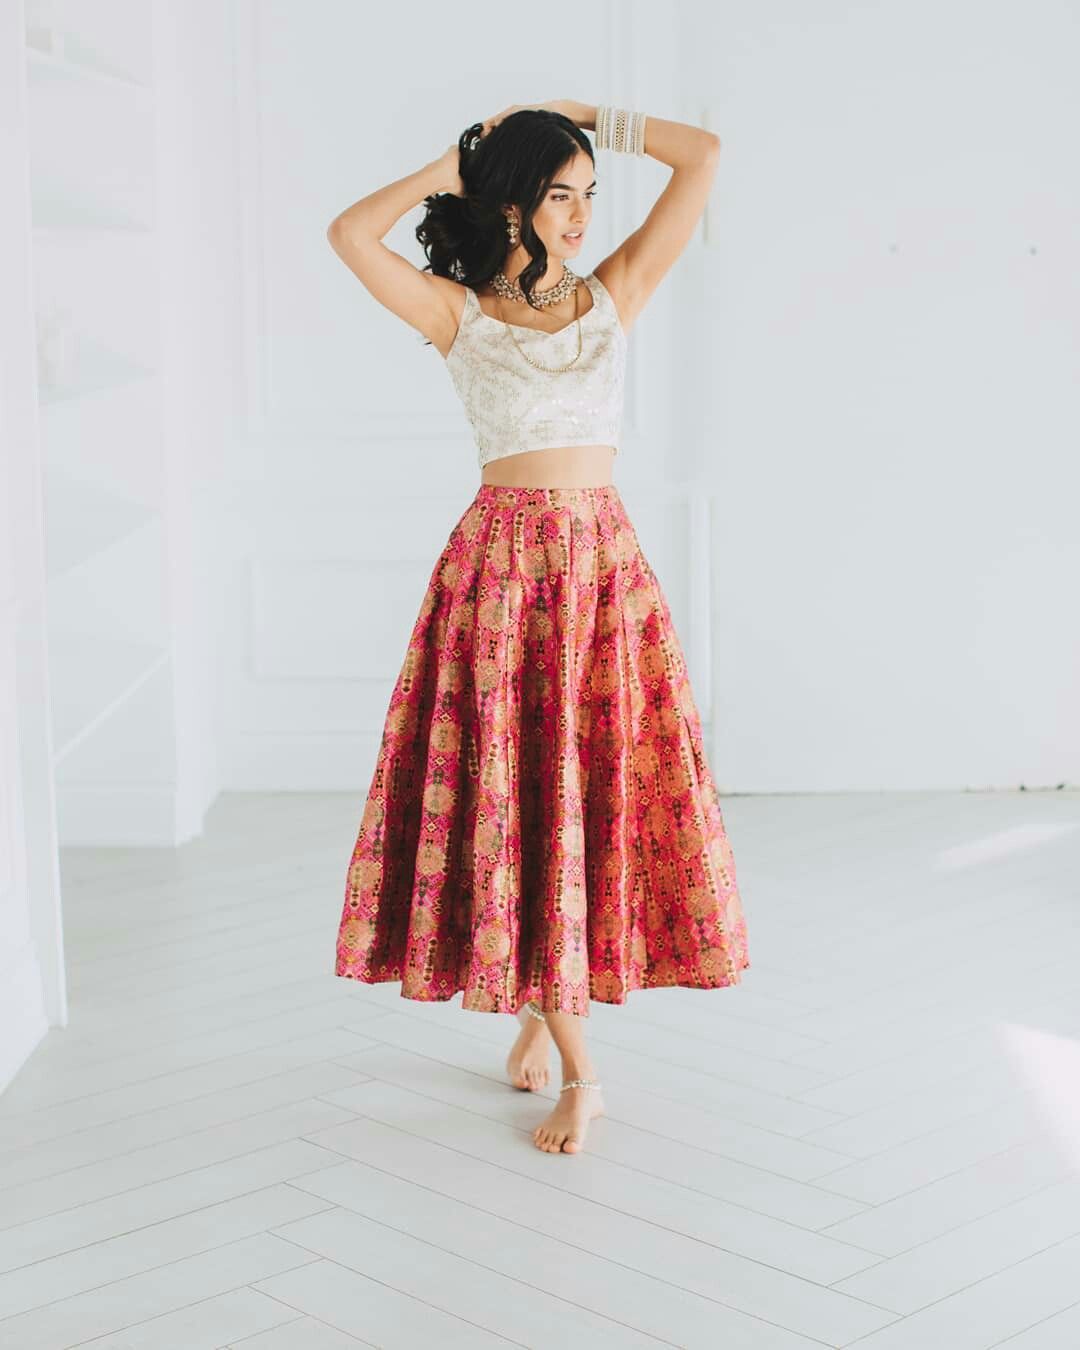 traditional blouse and skirt